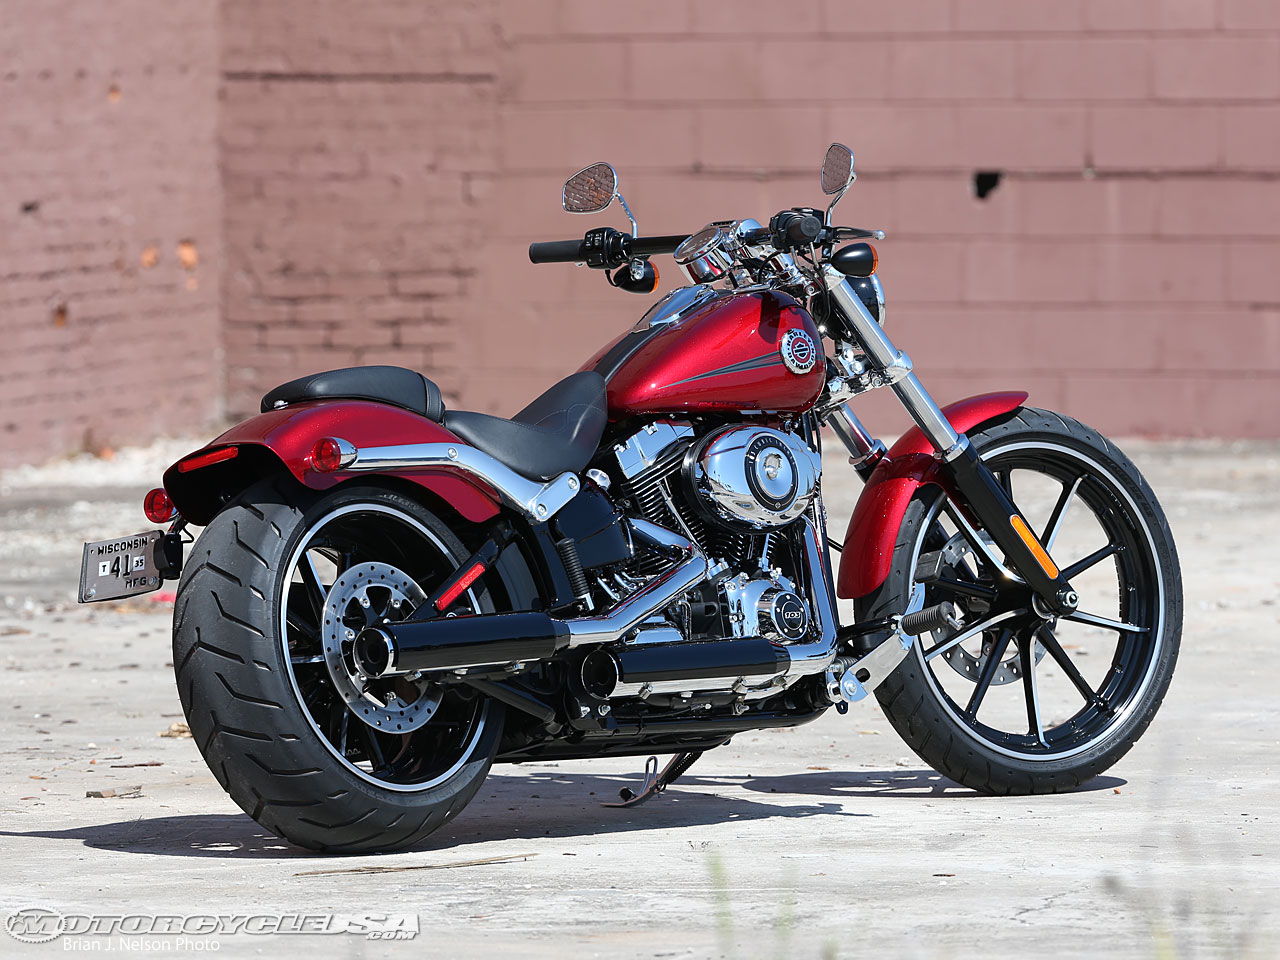 Best Looking STOCK Harley - Page 4 - Harley Davidson Forums